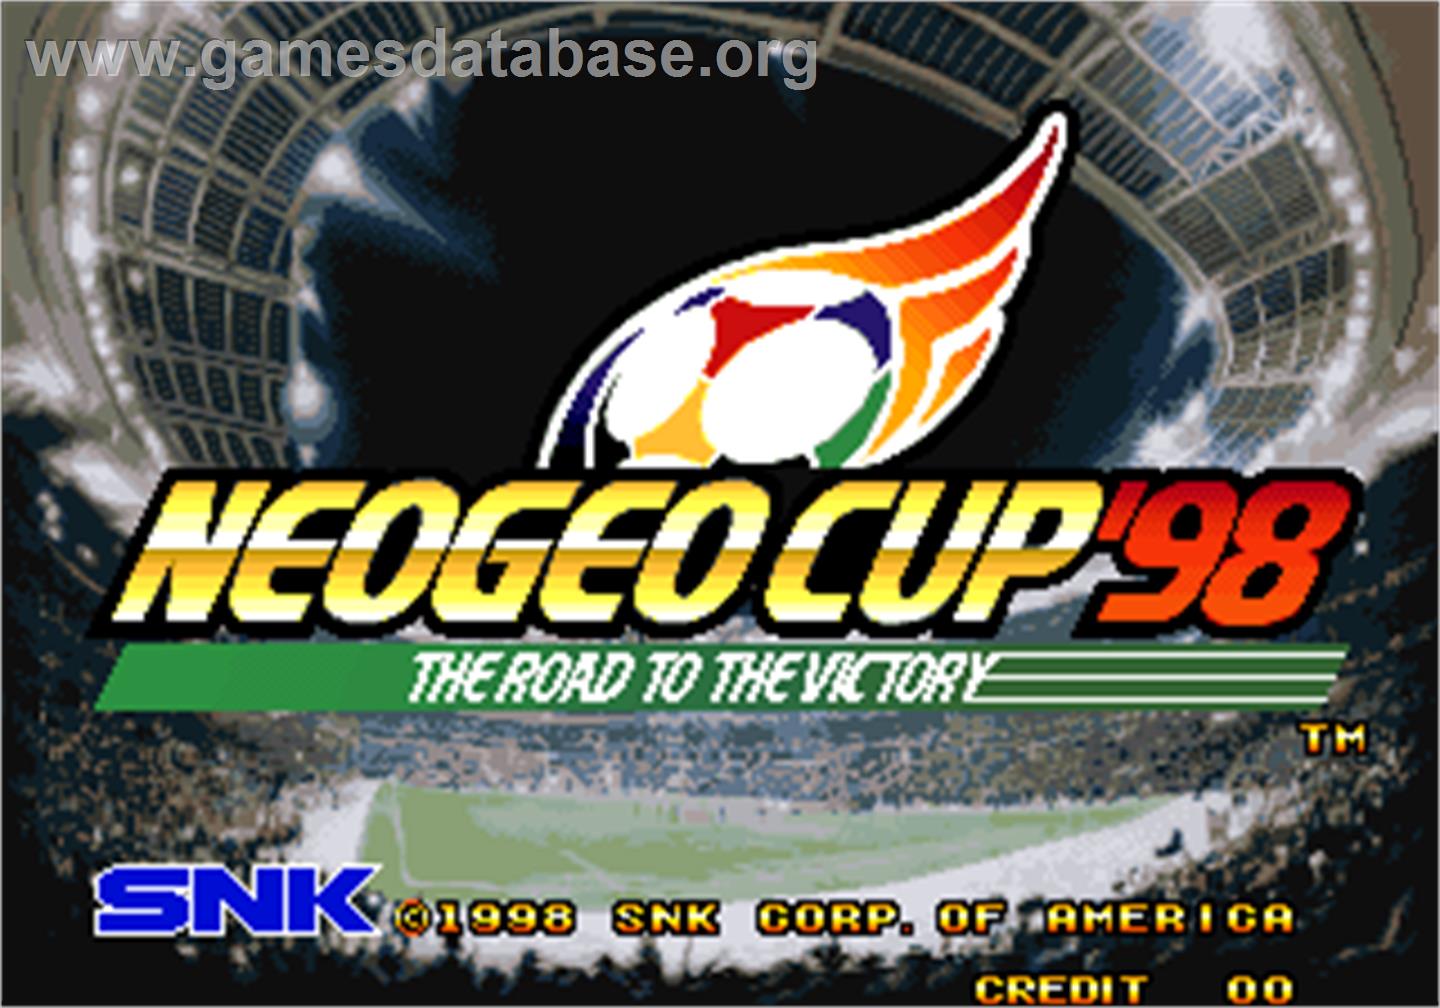 Neo-Geo Cup '98 - The Road to the Victory - Arcade - Artwork - Title Screen